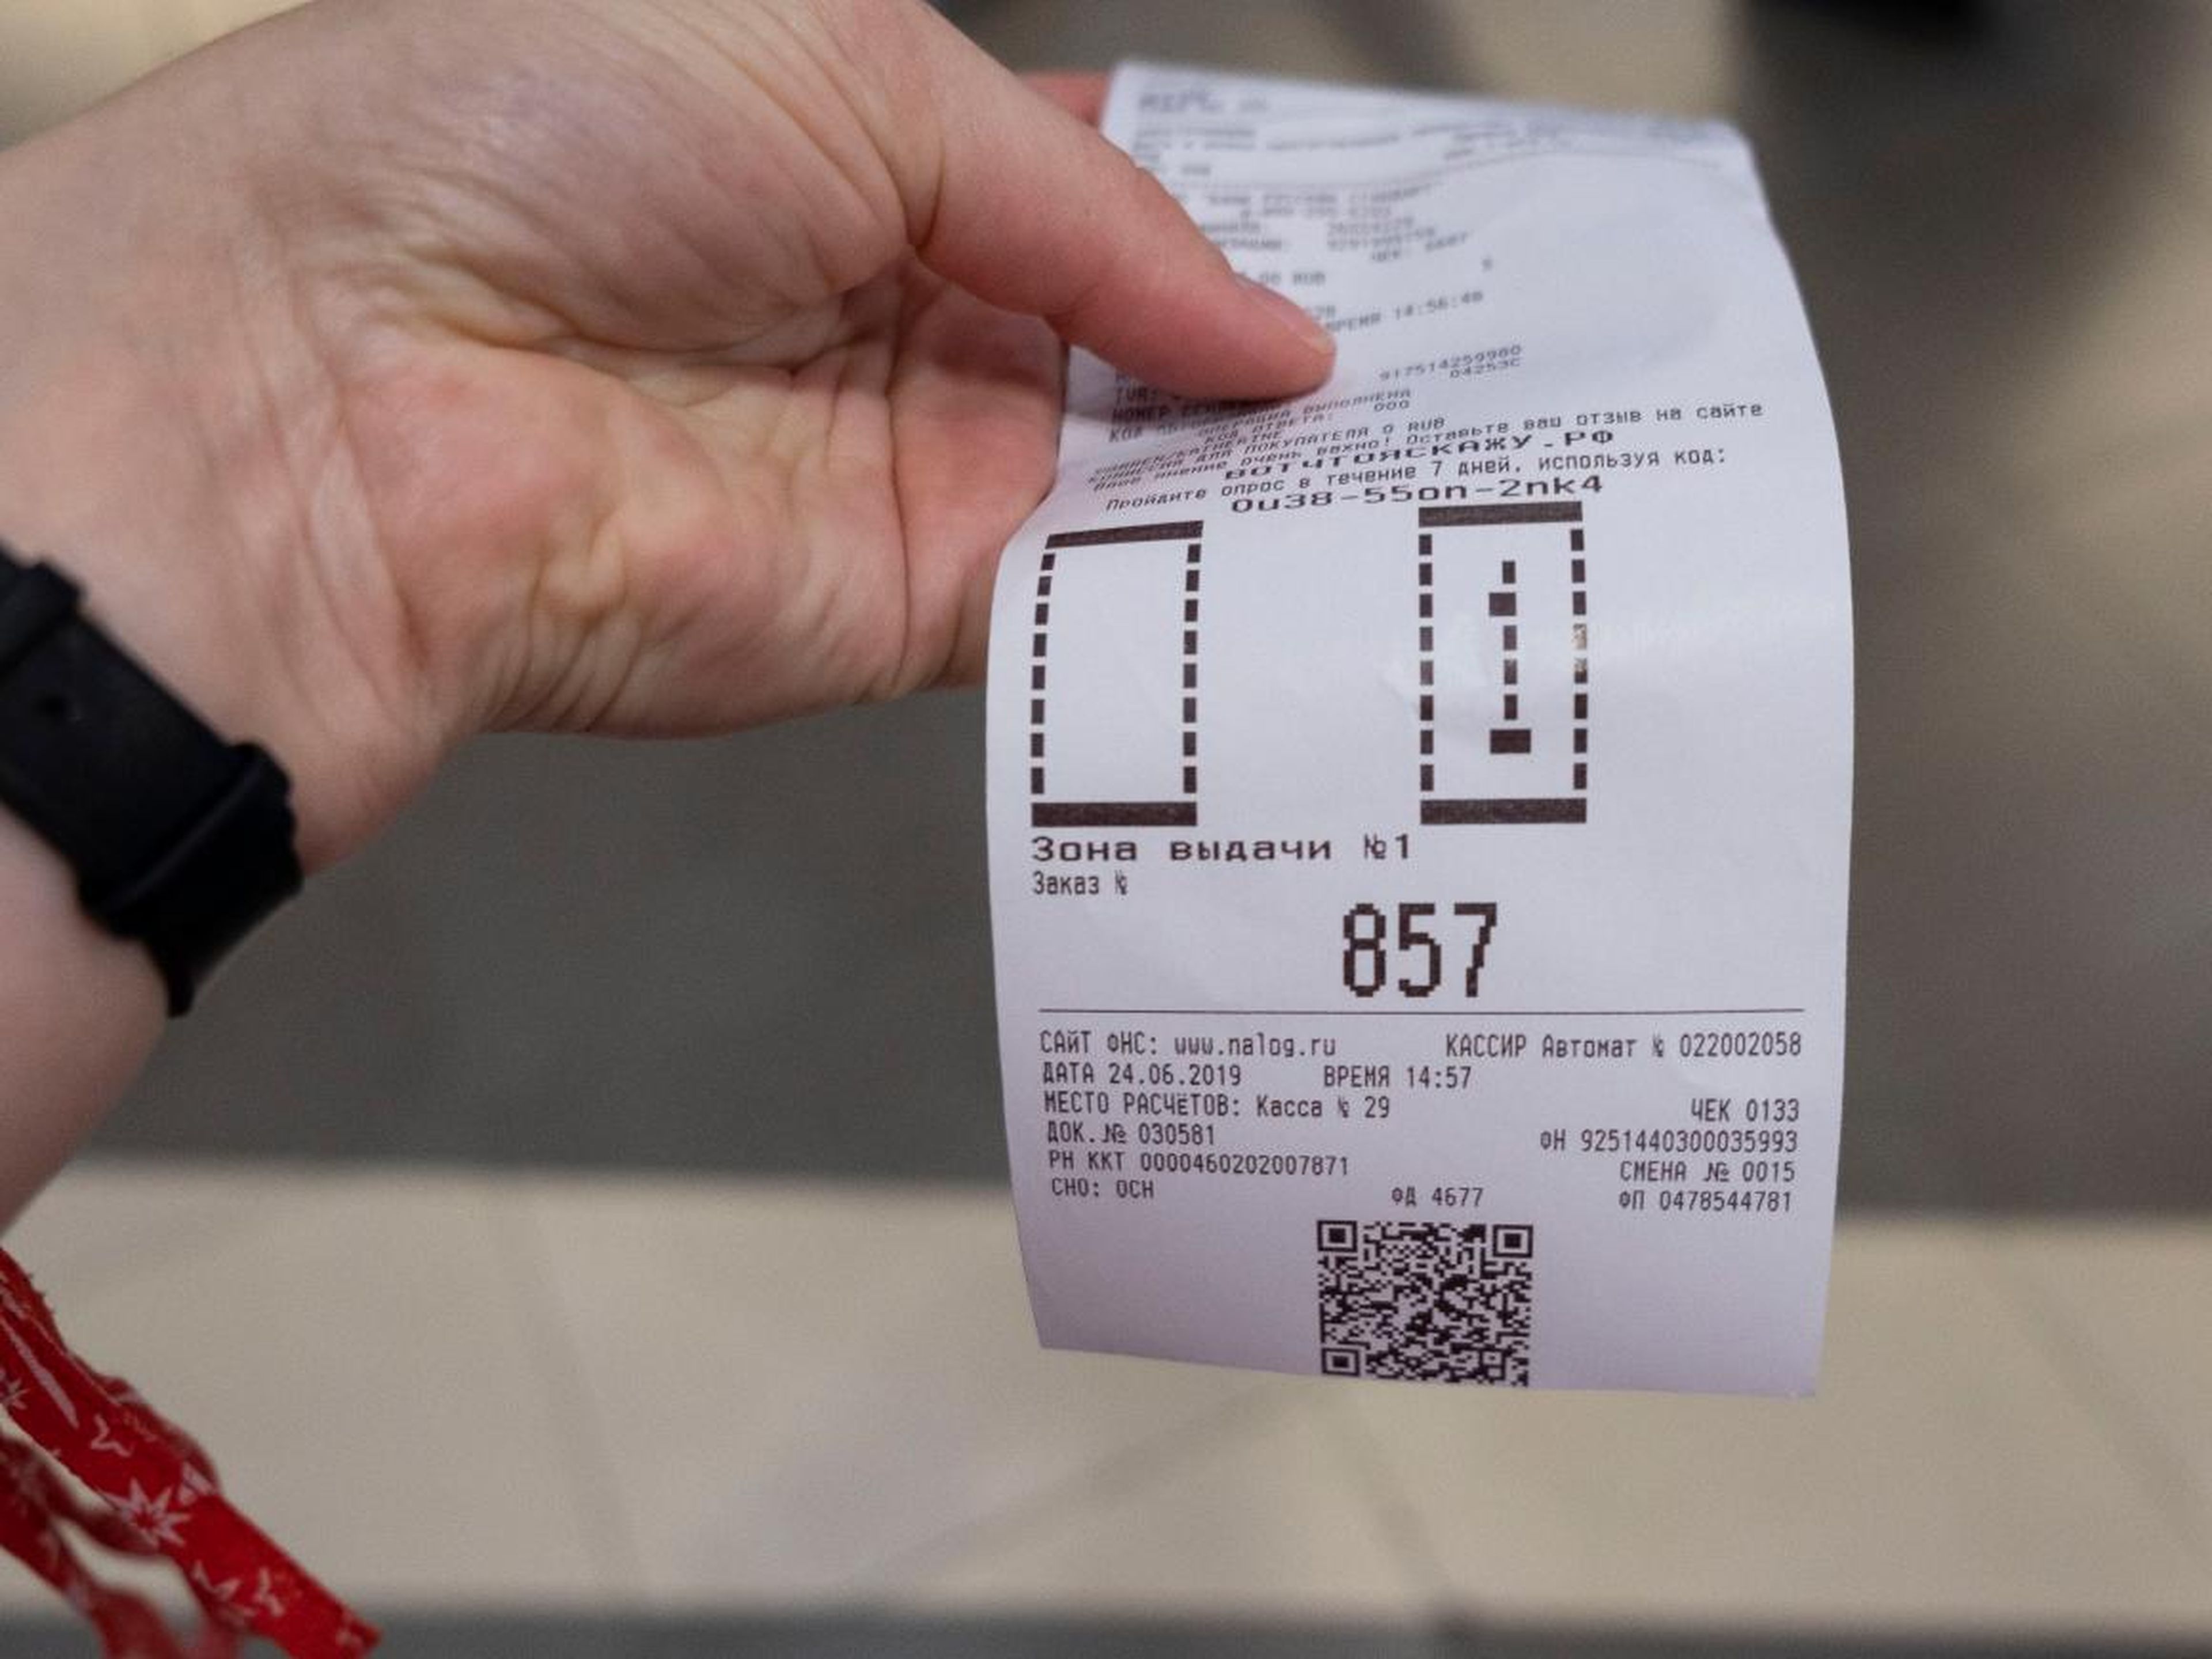 After I paid with my credit card at the kiosk, the machine printed out my receipt, which had the number 857 on it.